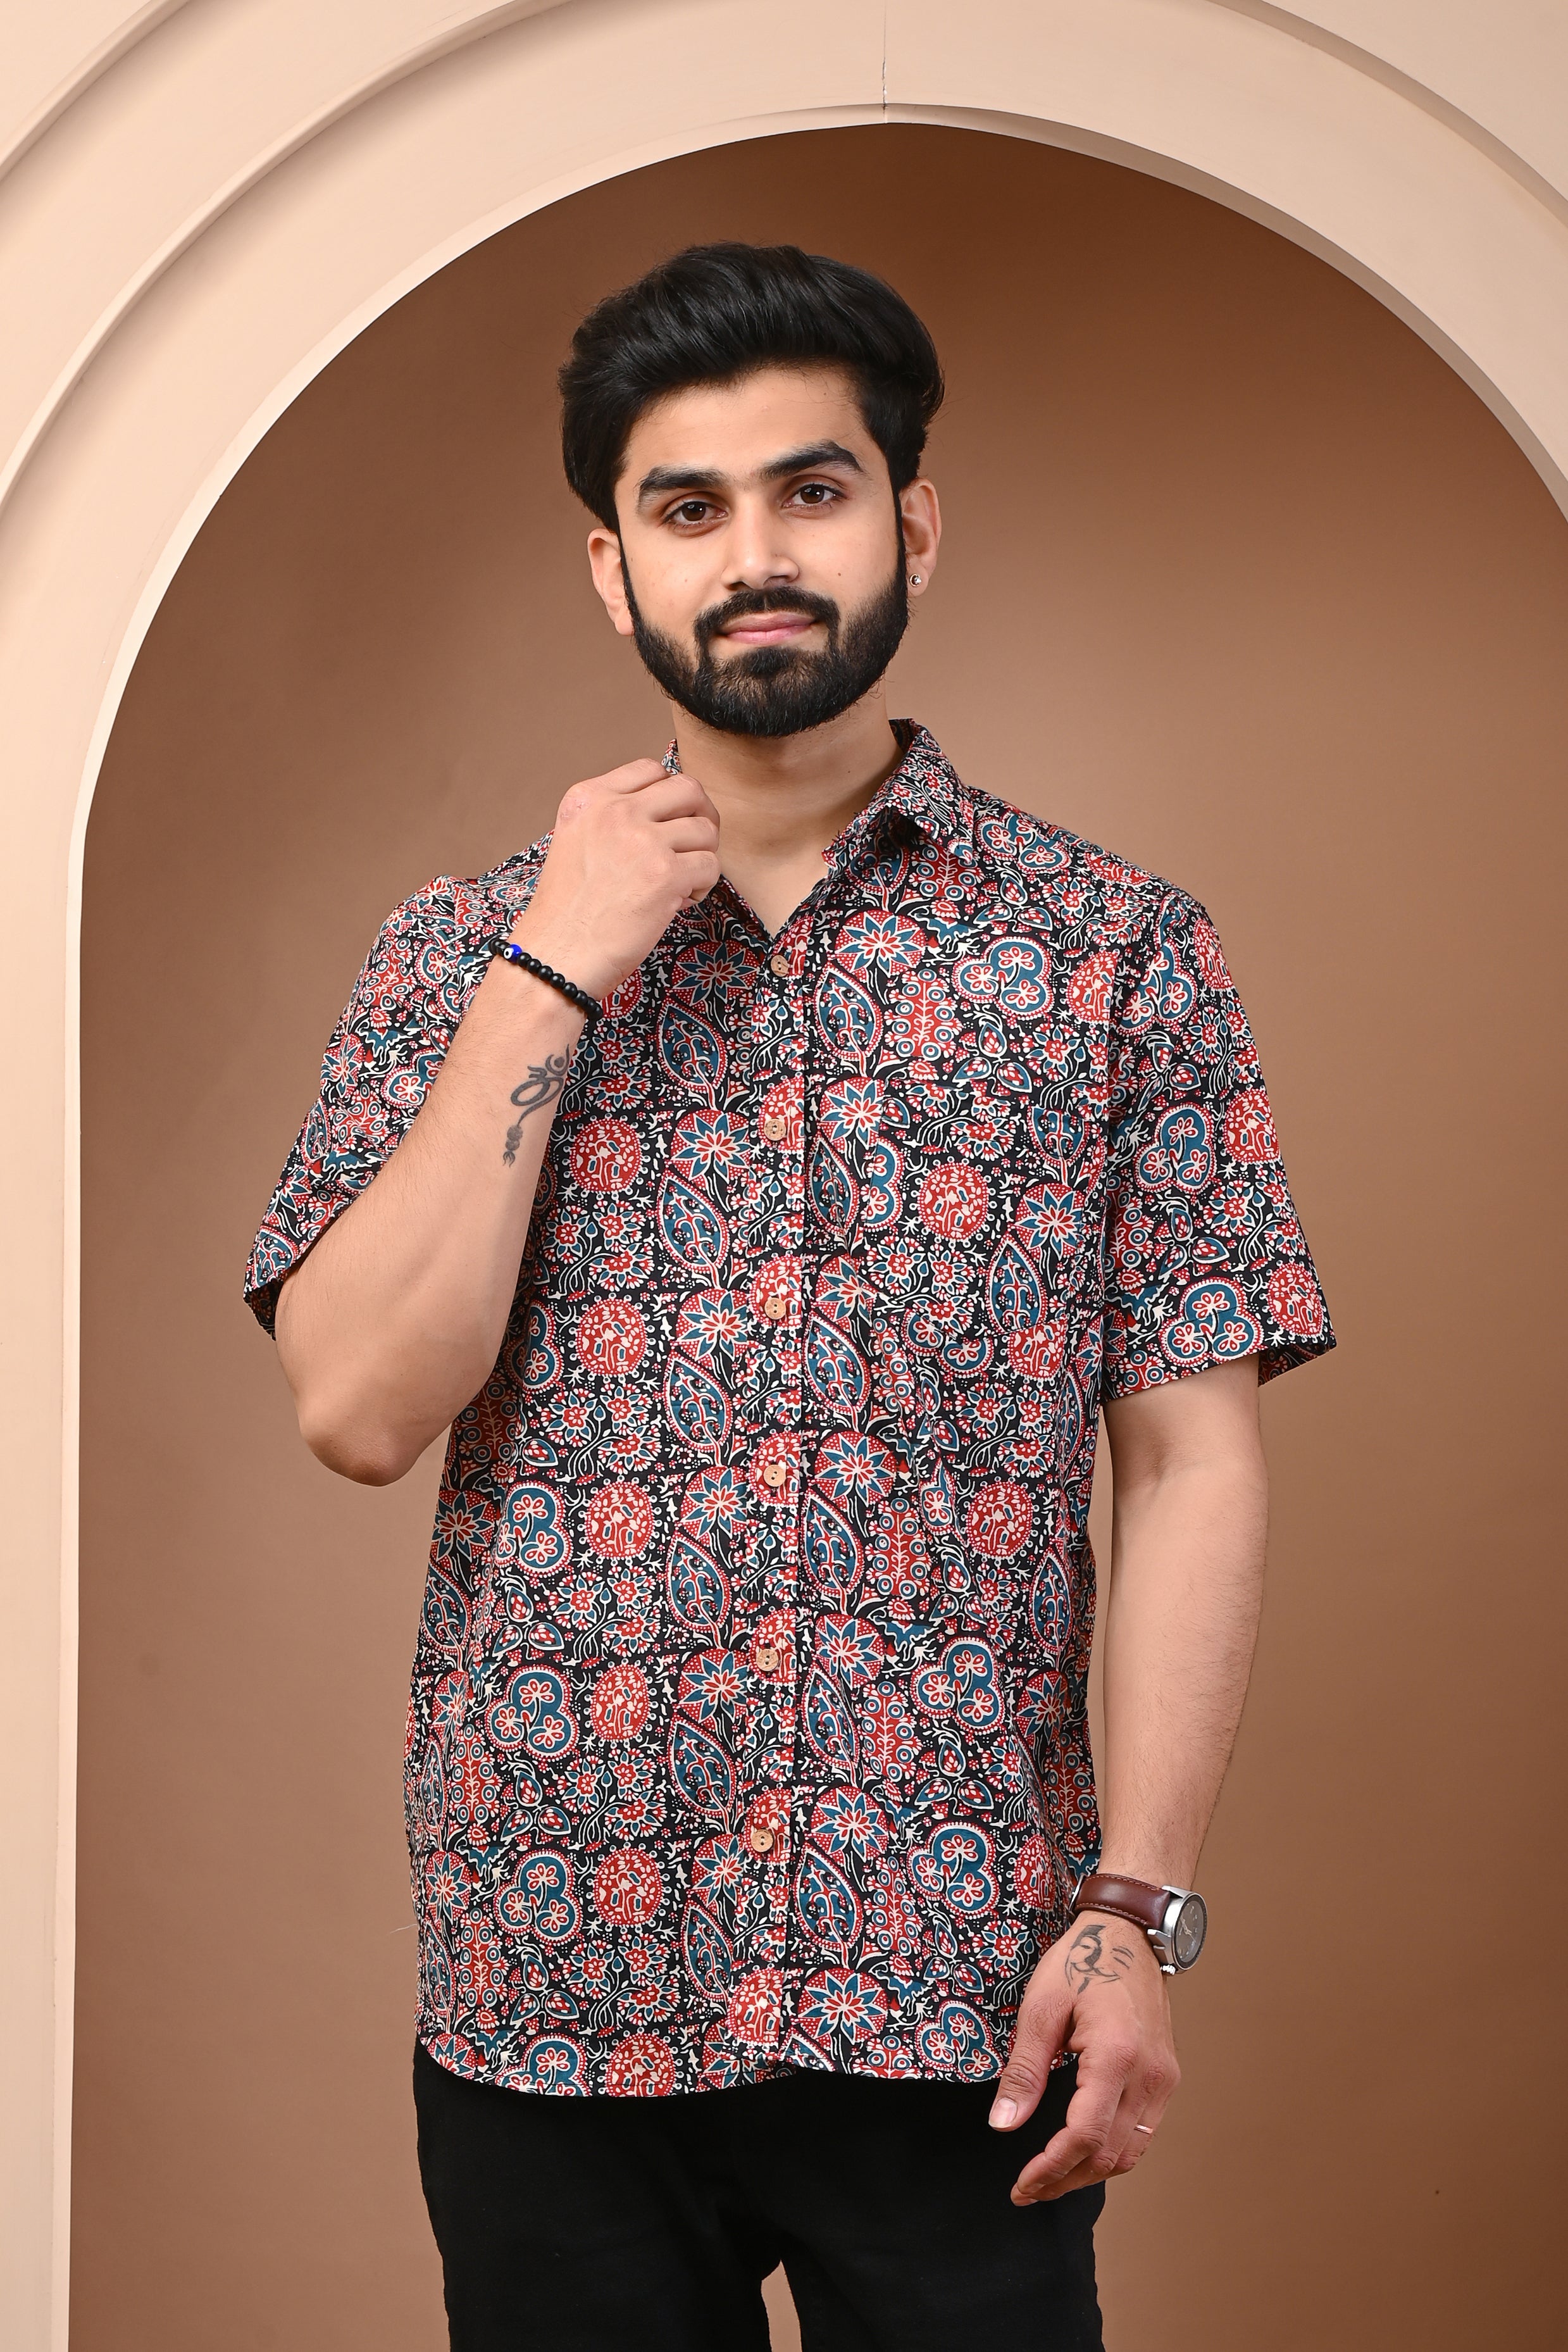 Cotton Red Stone Floral Men's Half Sleeves Shirt